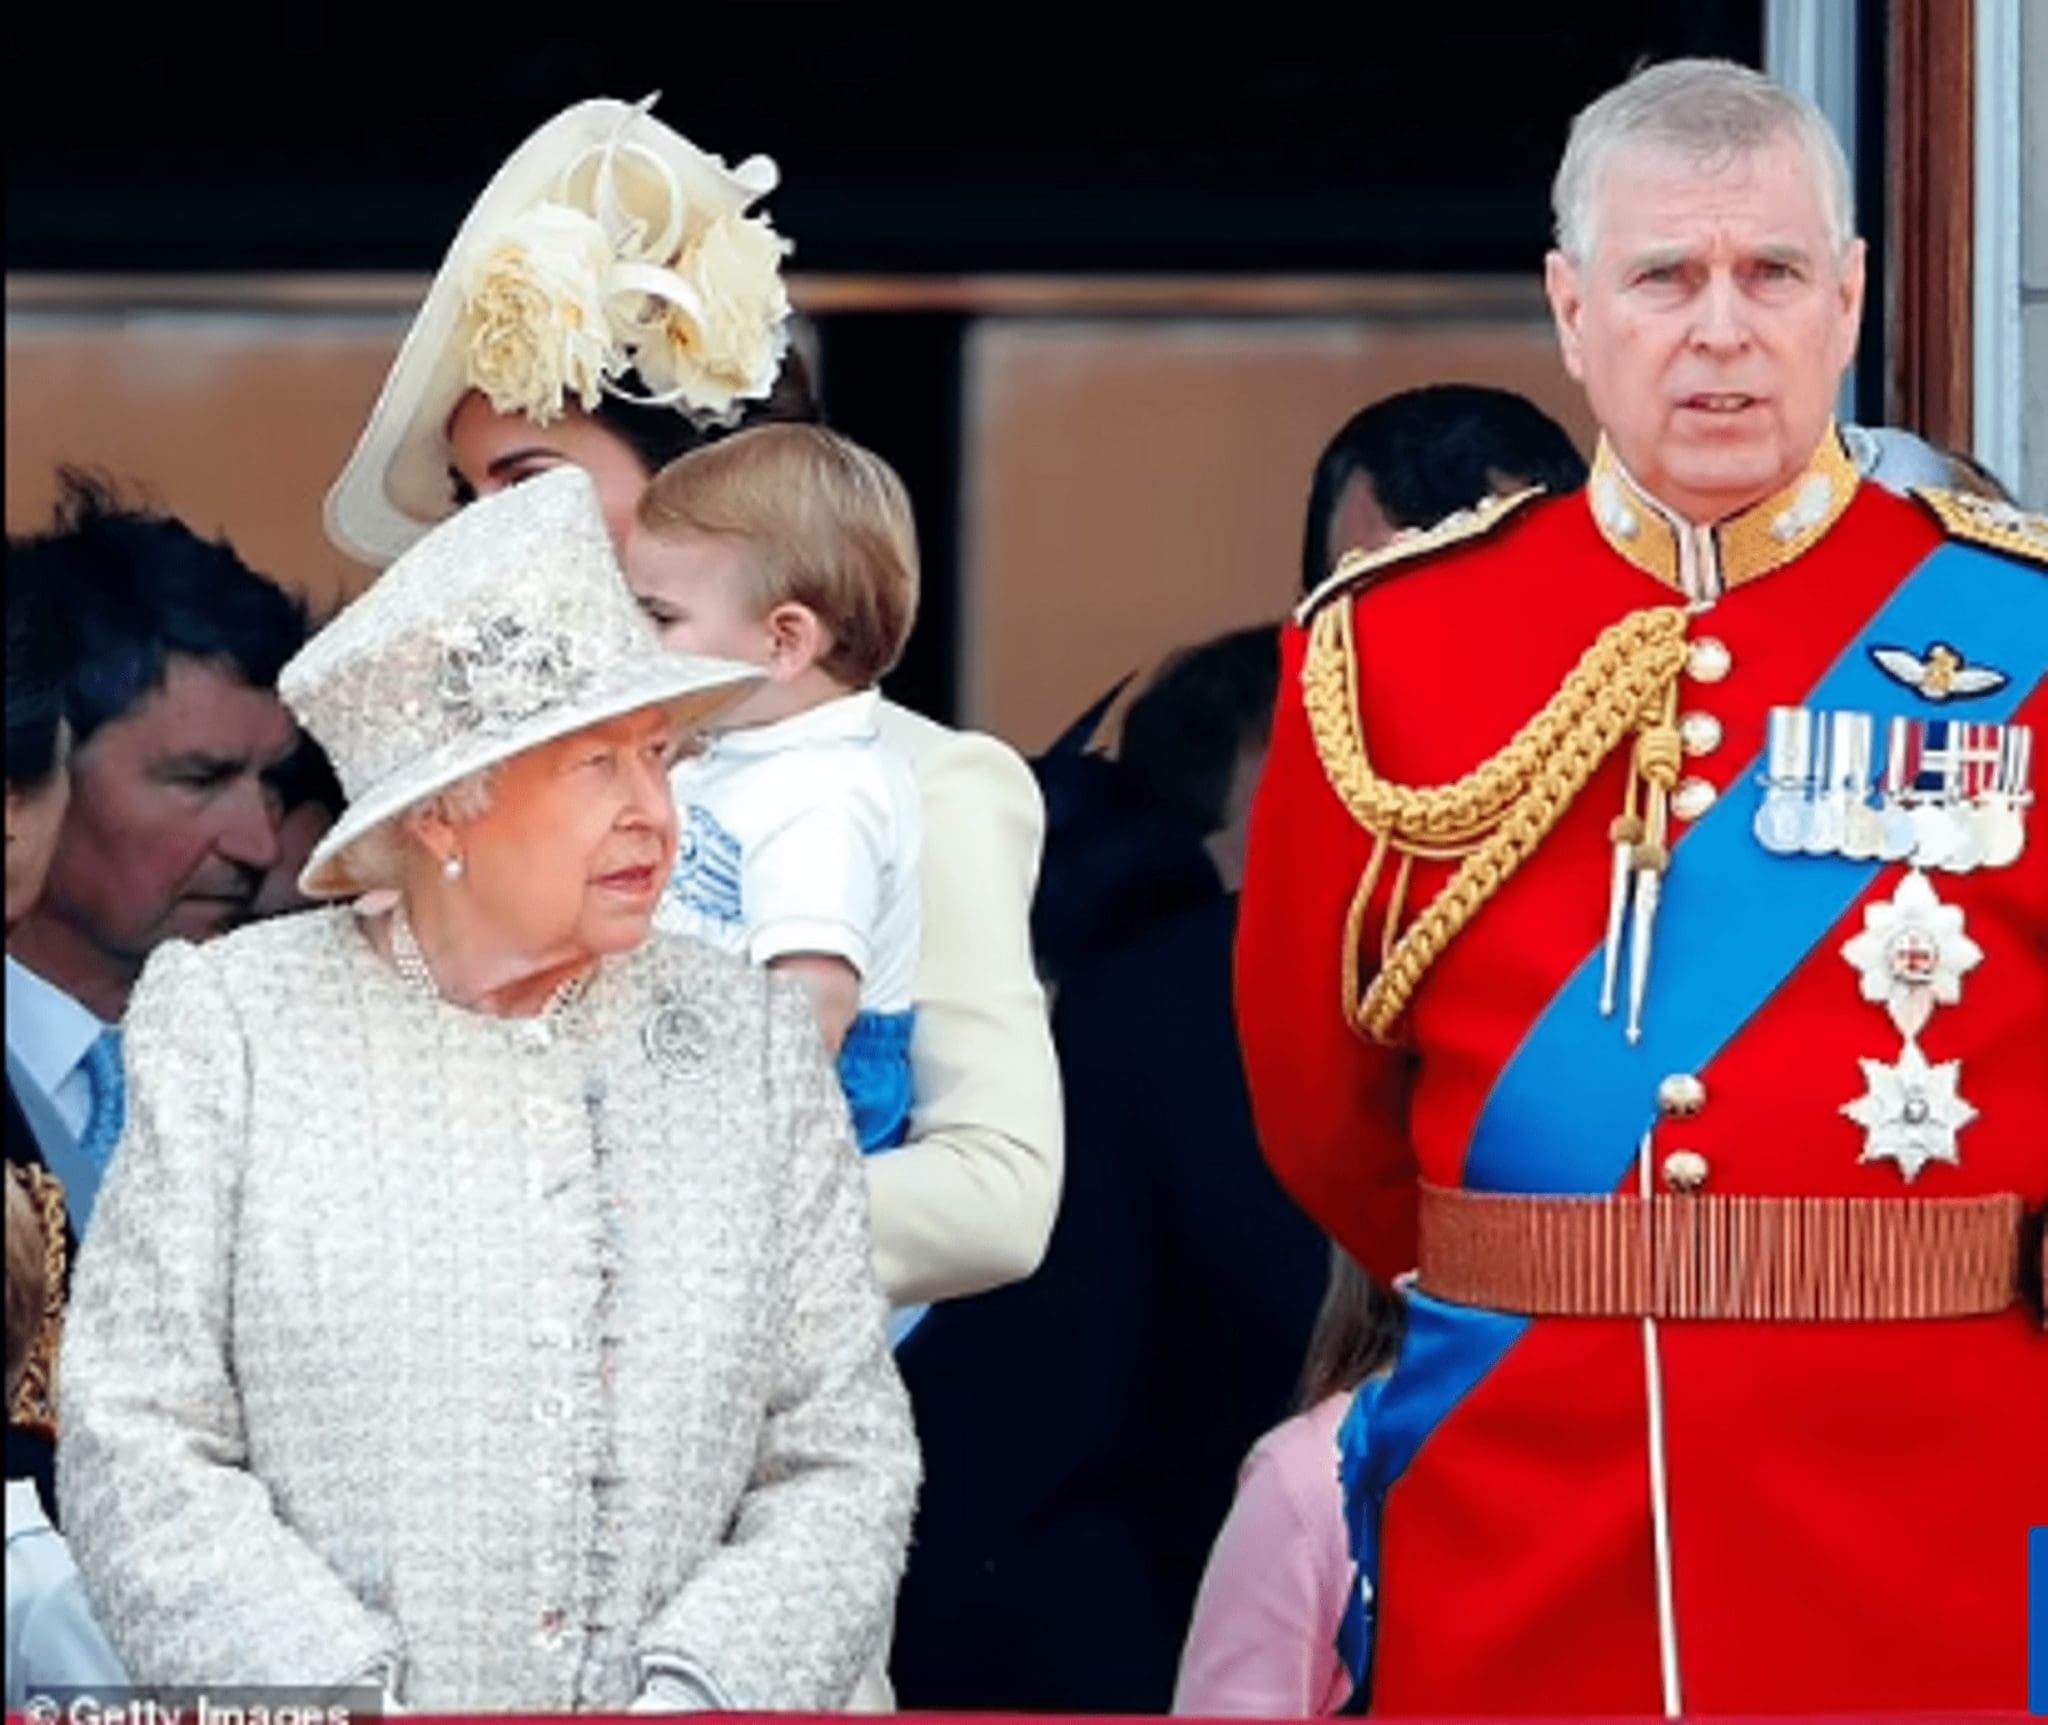 Prince Andrew enters Queen Elizabeth II for Garter Day tradition following sexual charge